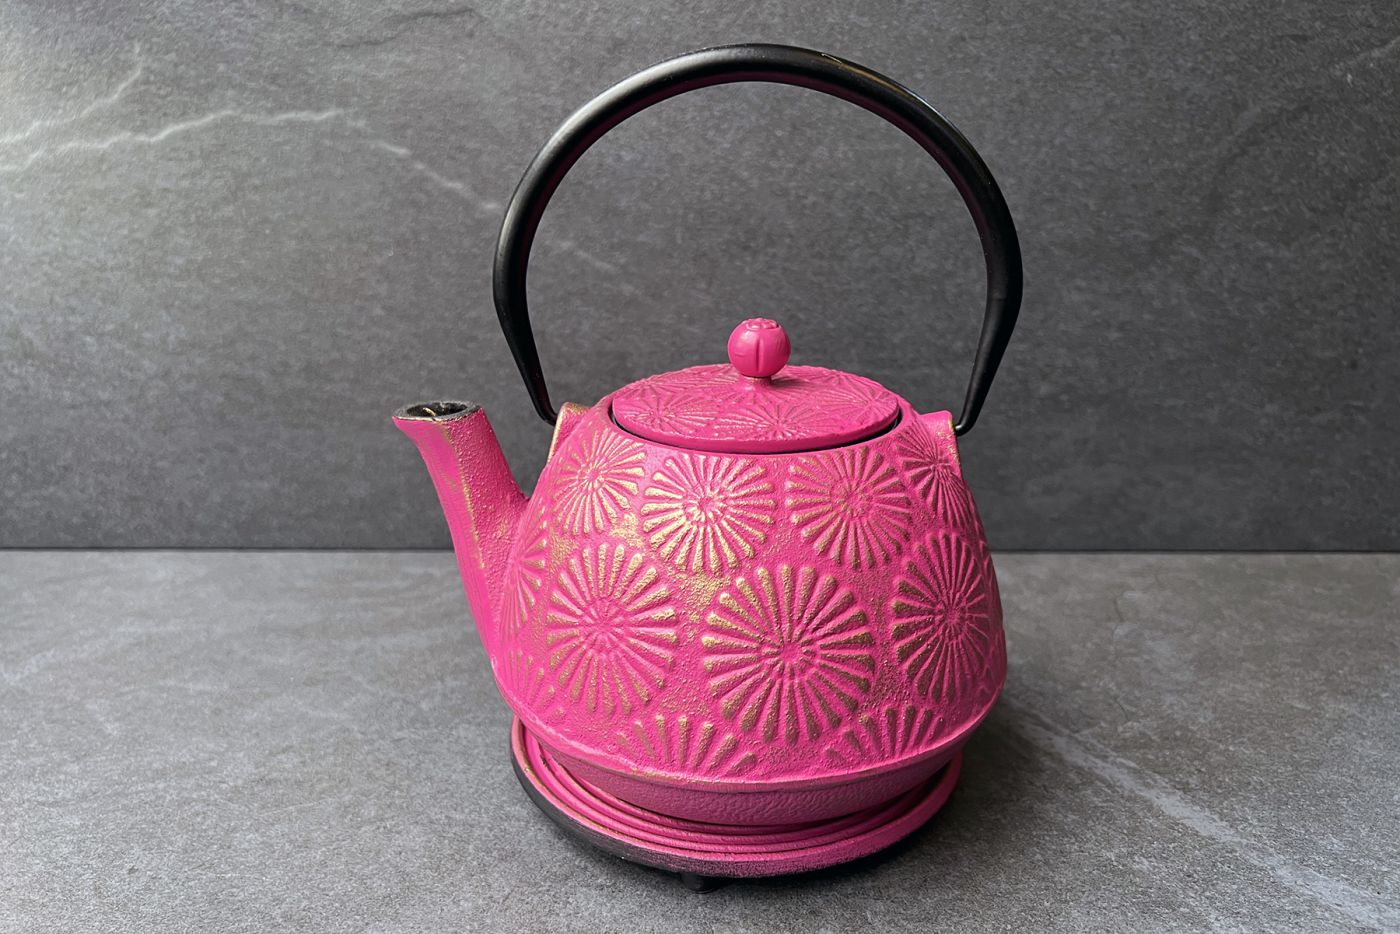 1.2l London Pottery Red Teapot With White Polka Dots